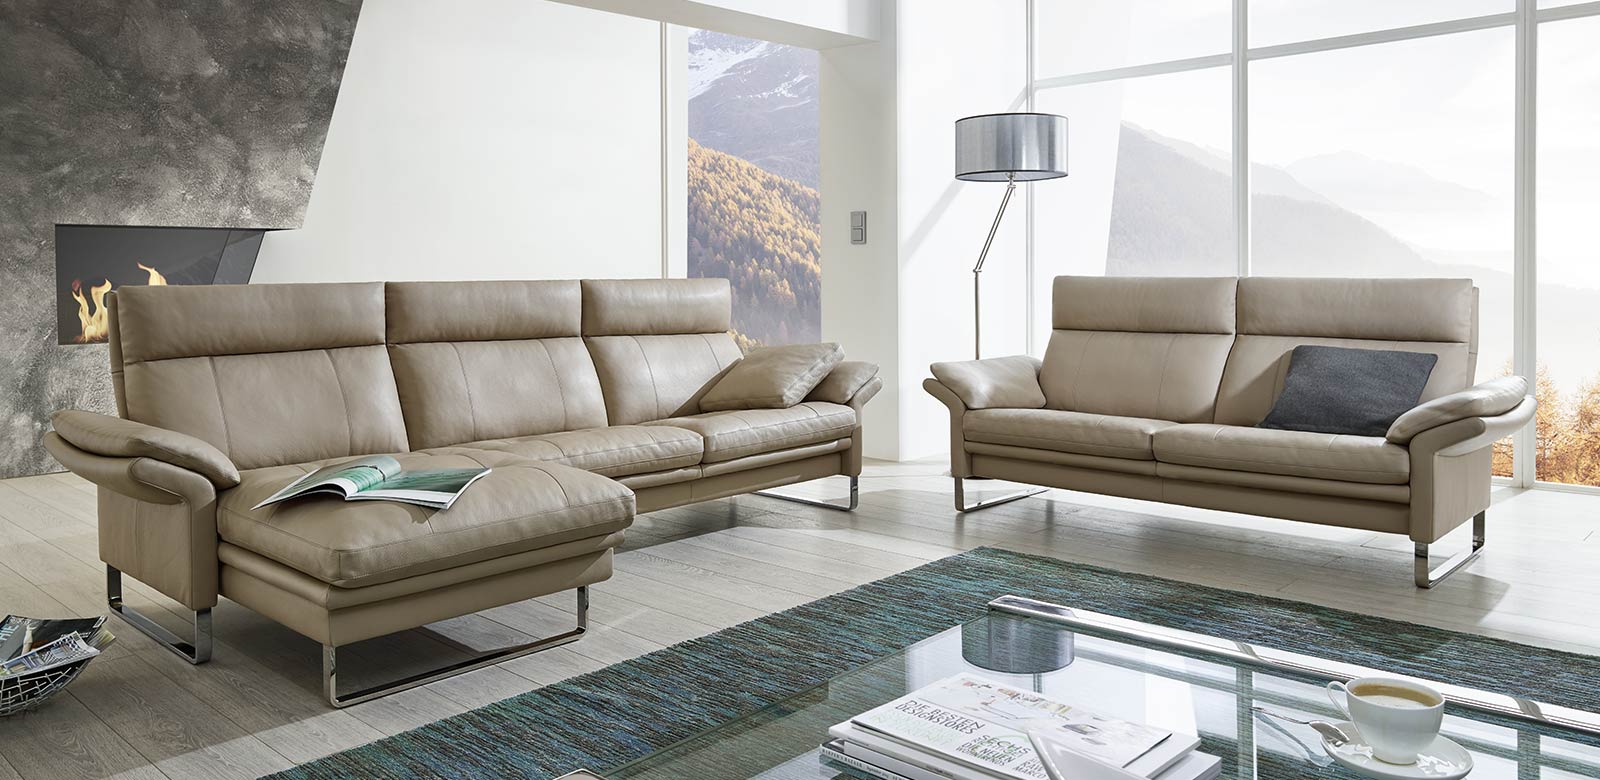 Our Lucca seating furniture, a high-quality leather sofa, is firmly anchored in the collection philosophy and documents the classic claim among Erpo's high-quality sofas. At the same time, the relax sofa comes up with real innovations. The softly curved armrests including the cushions allow different ways of sitting. The second, closer look is drawn by the parallel seams of the back and seat cushions.